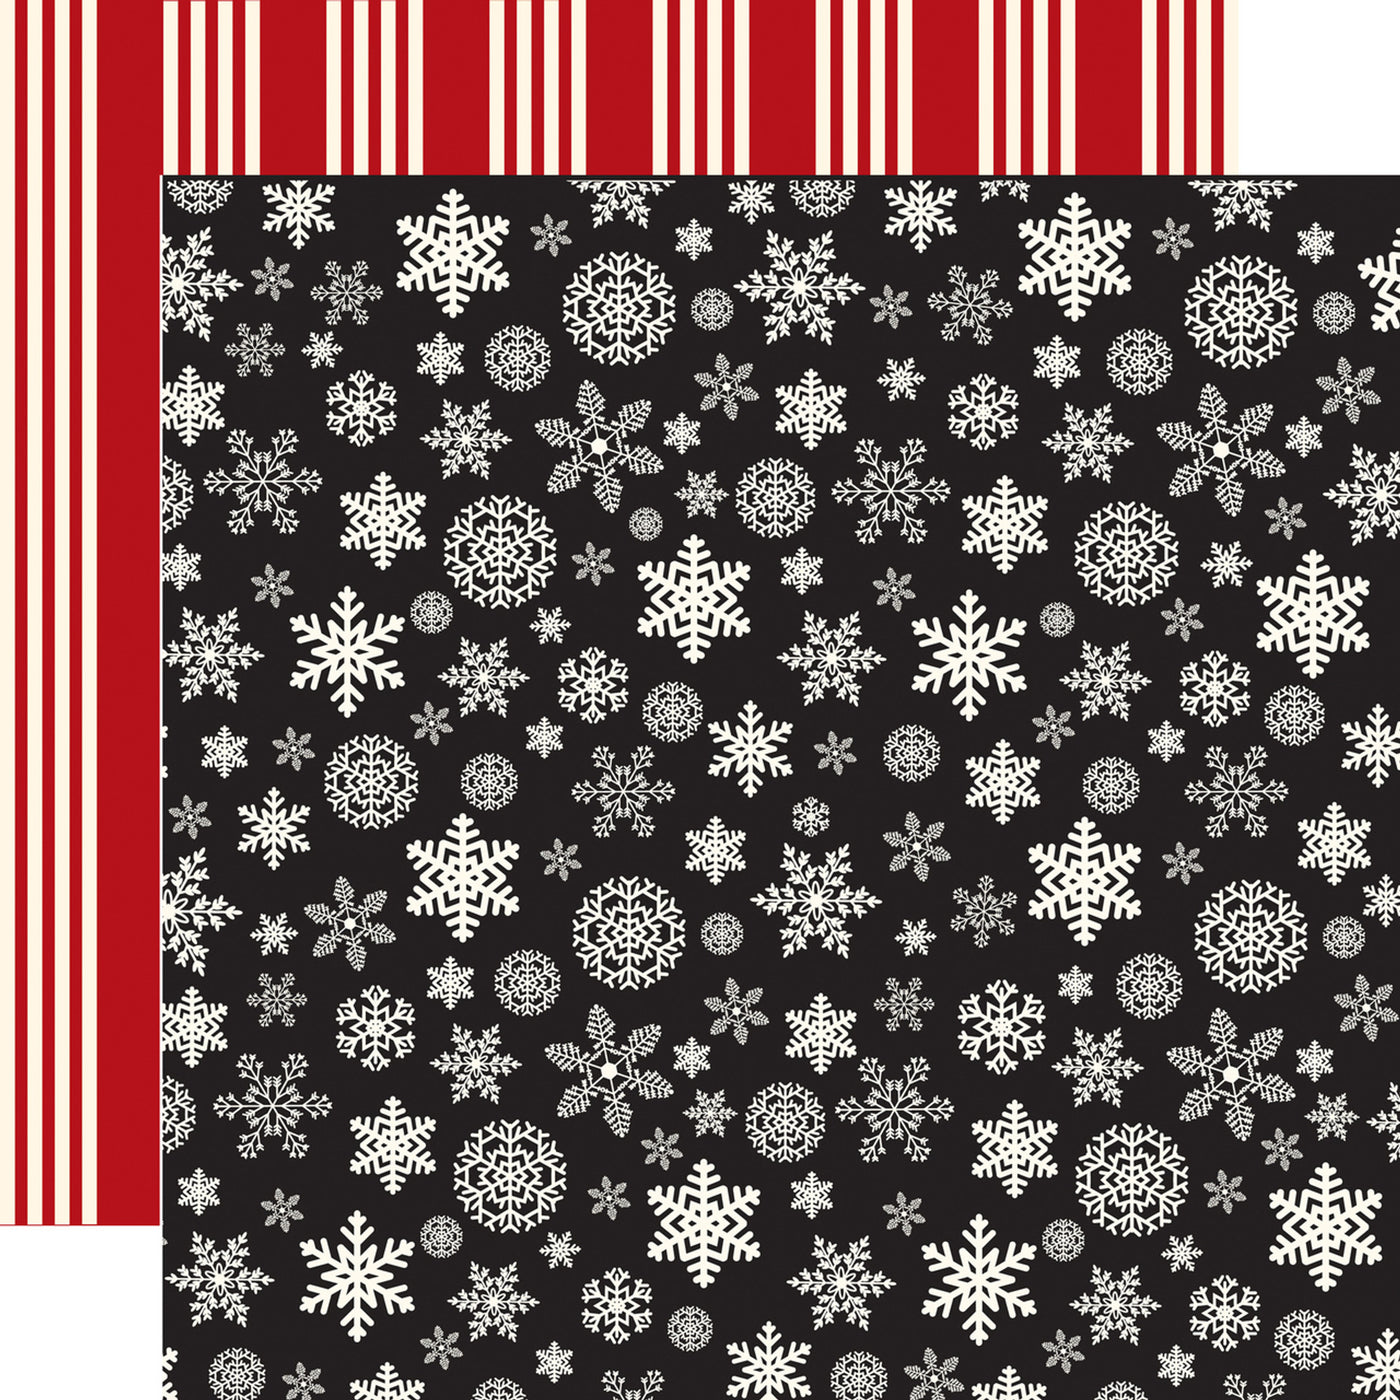 Double-sided 12x12 cardstock with white snowflakes on a black background; the reverse is white stripes on a red background. 80 lb cover. Felt texture.